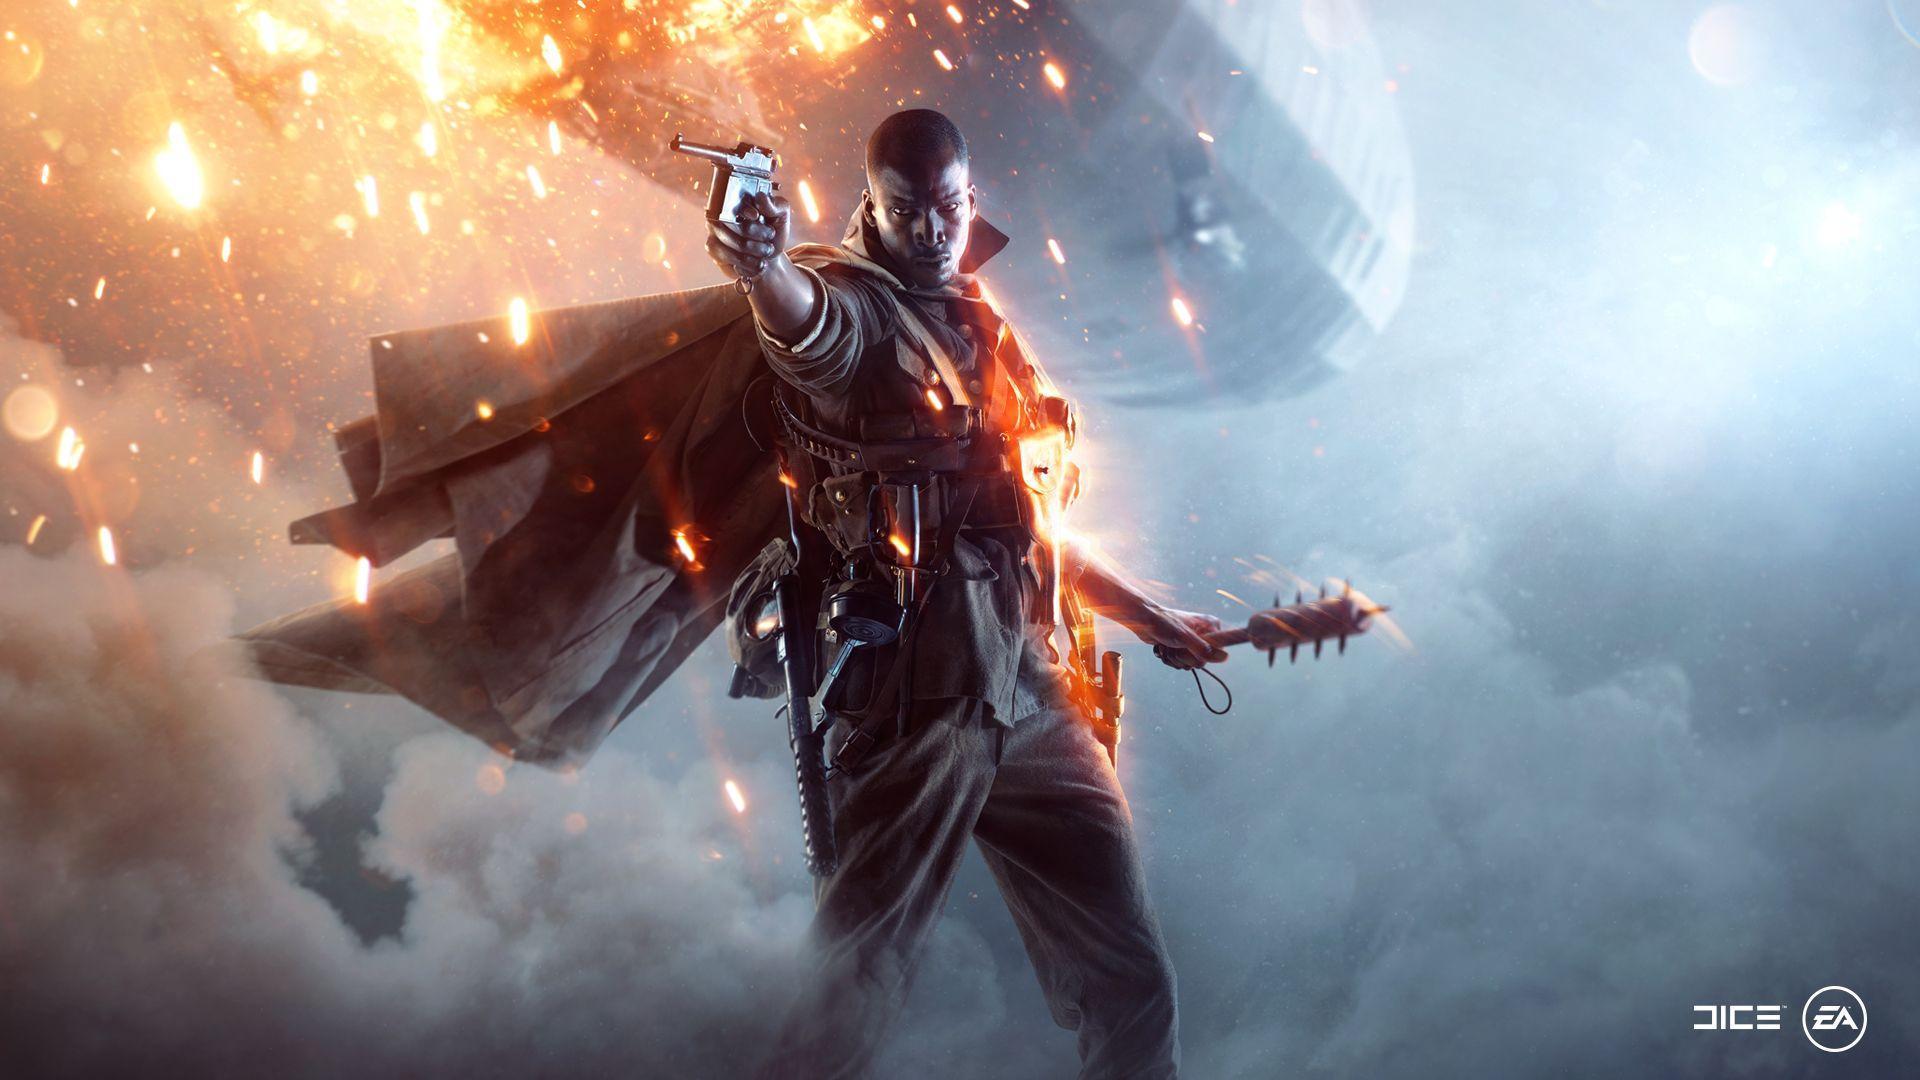 Battlefield 1 Wallpaper for PC, Mobile, and Tablets